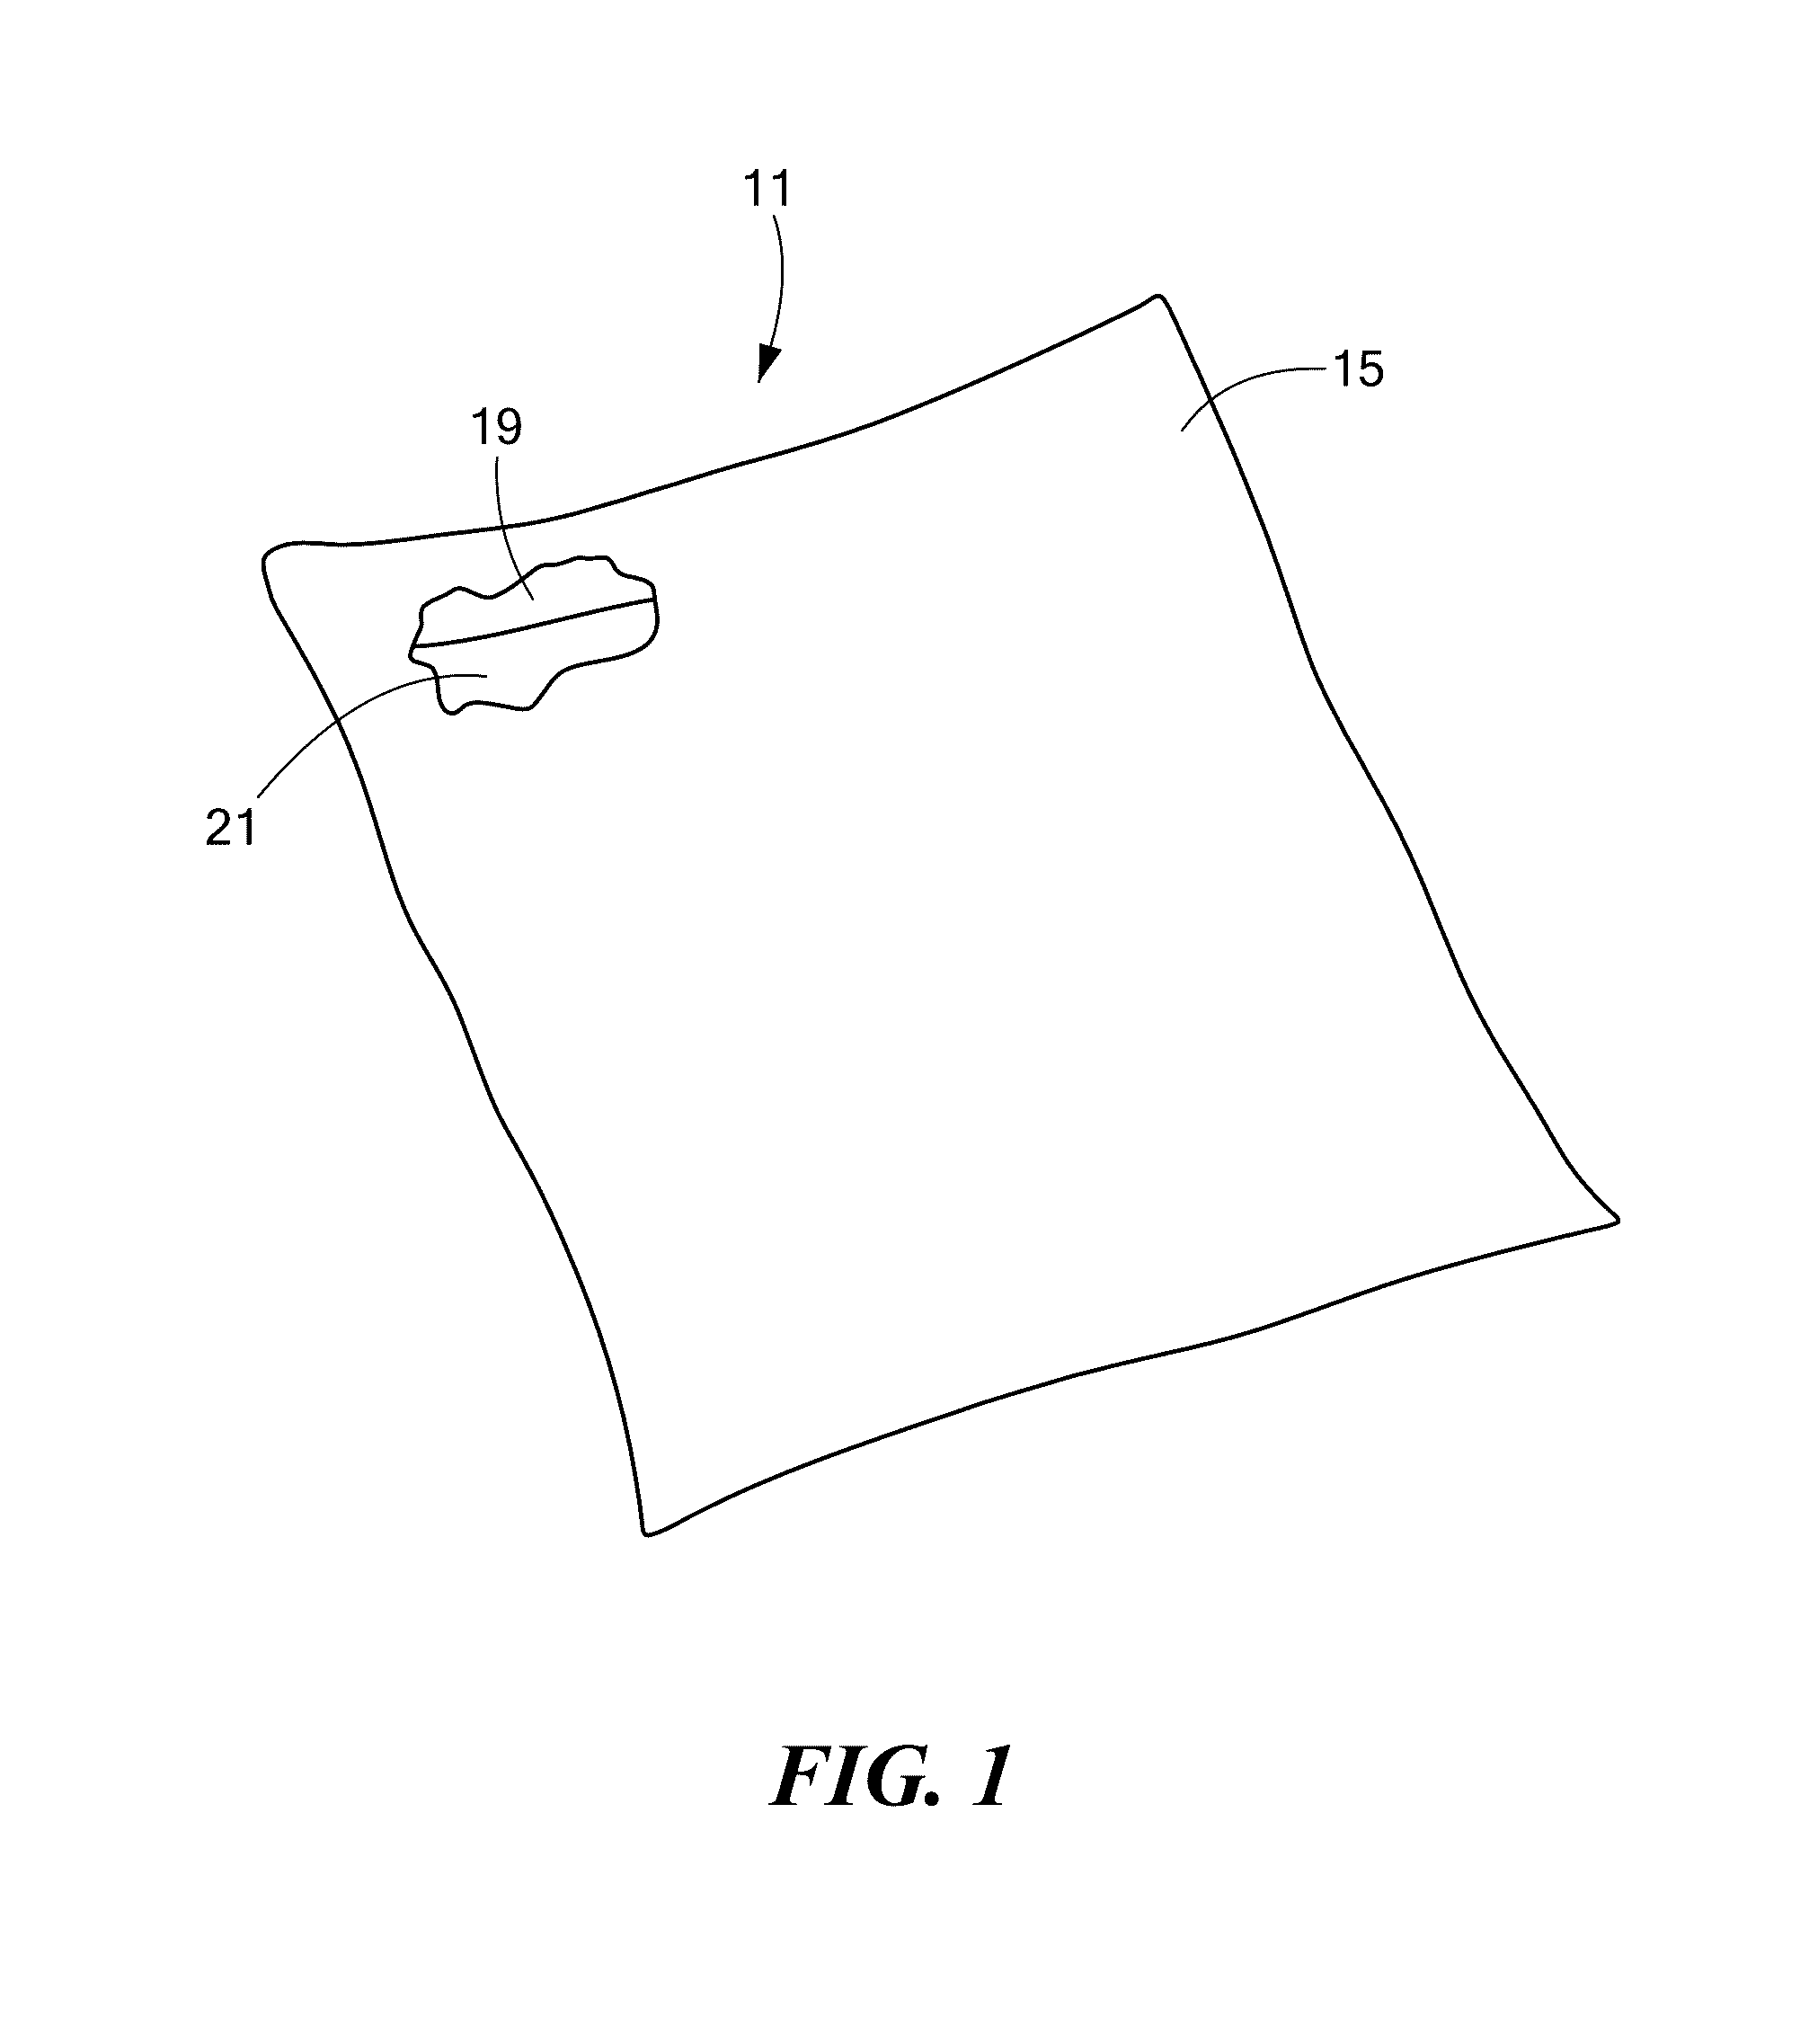 Gel comprising a phase-change material, method of preparing the gel, and thermal exchange implement comprising the gel